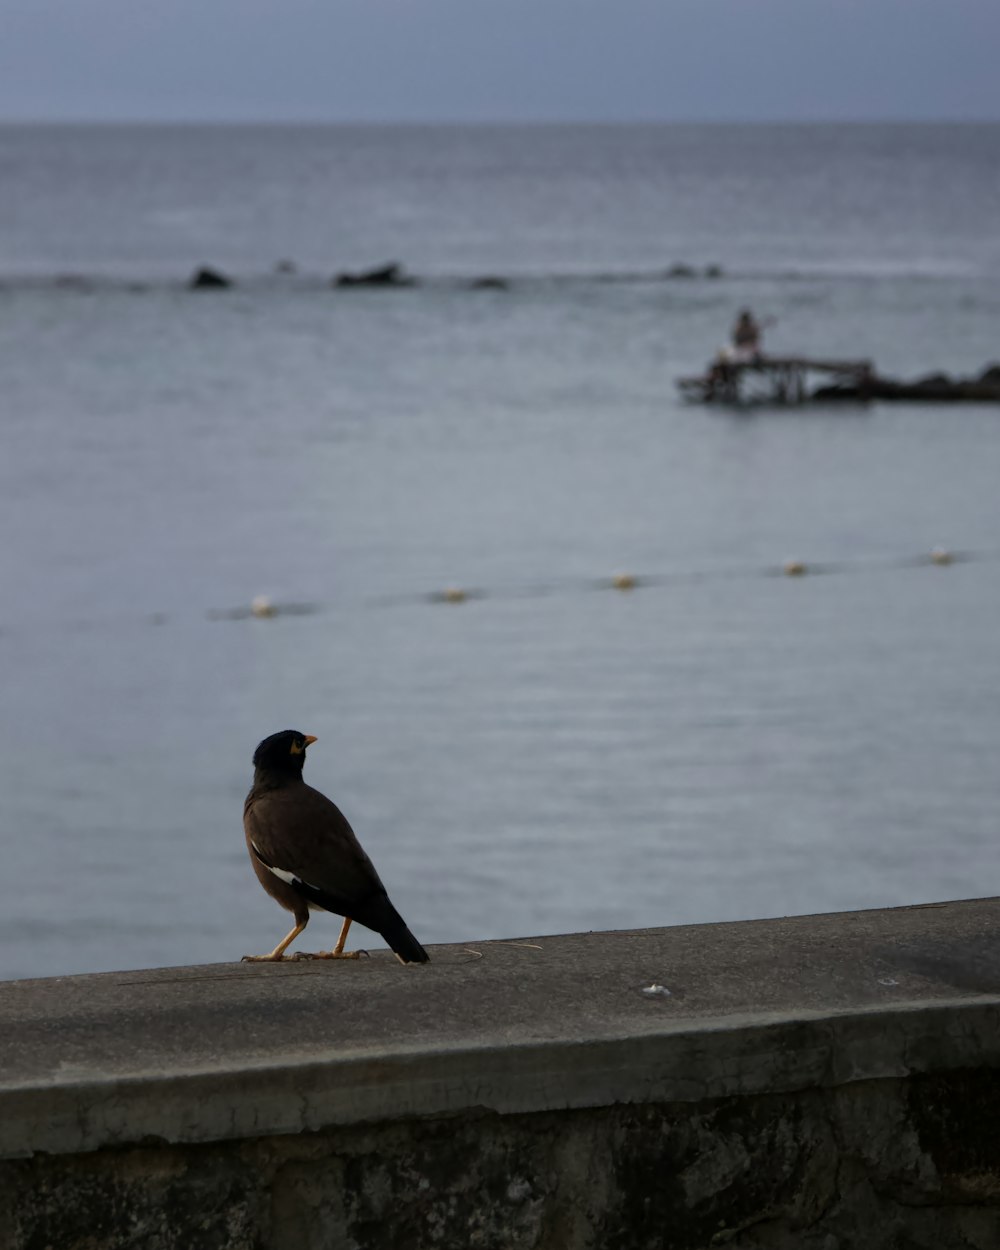 a bird is sitting on a ledge near the water